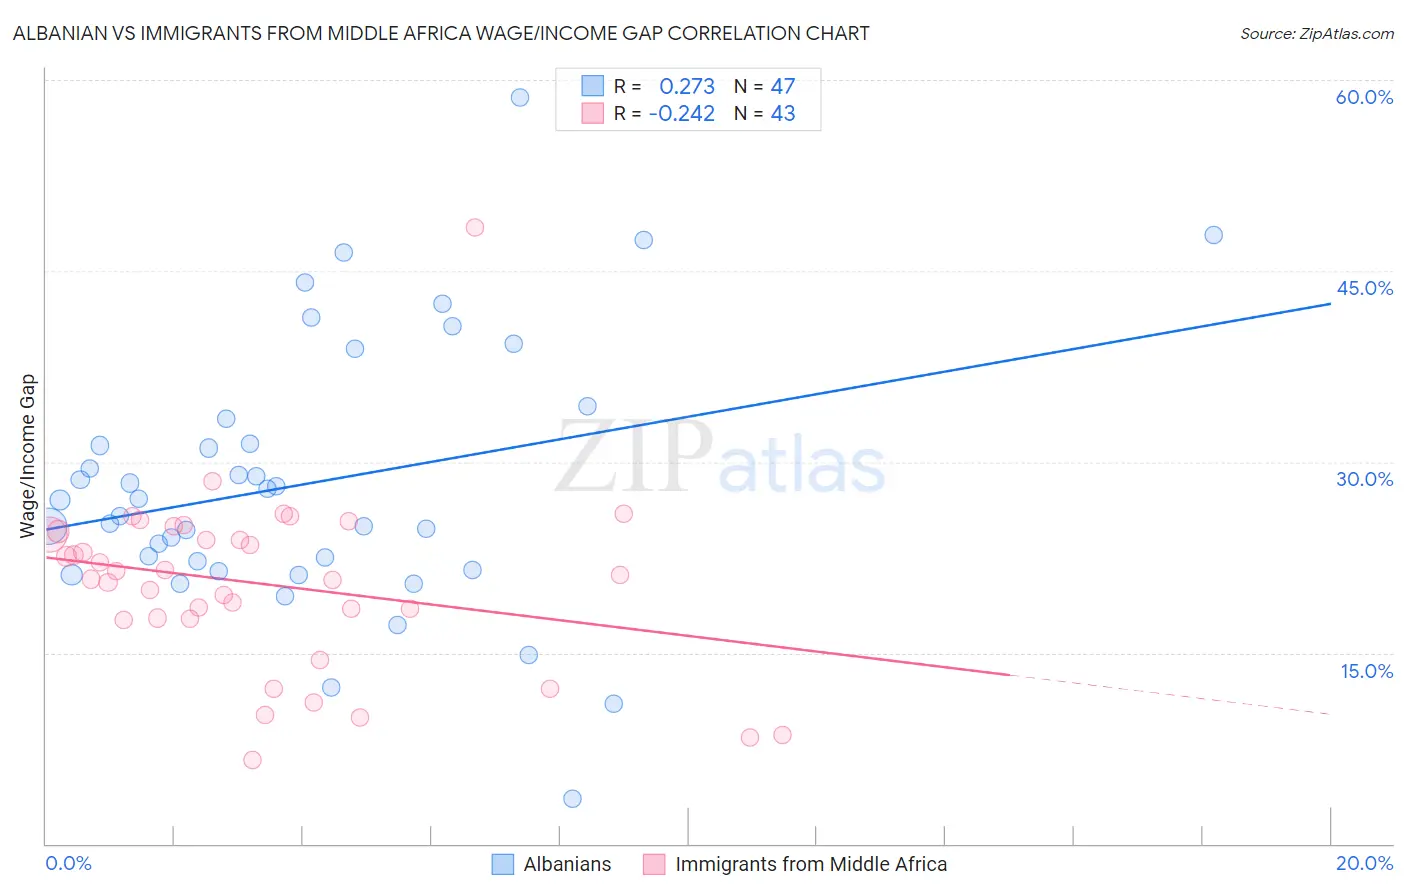 Albanian vs Immigrants from Middle Africa Wage/Income Gap